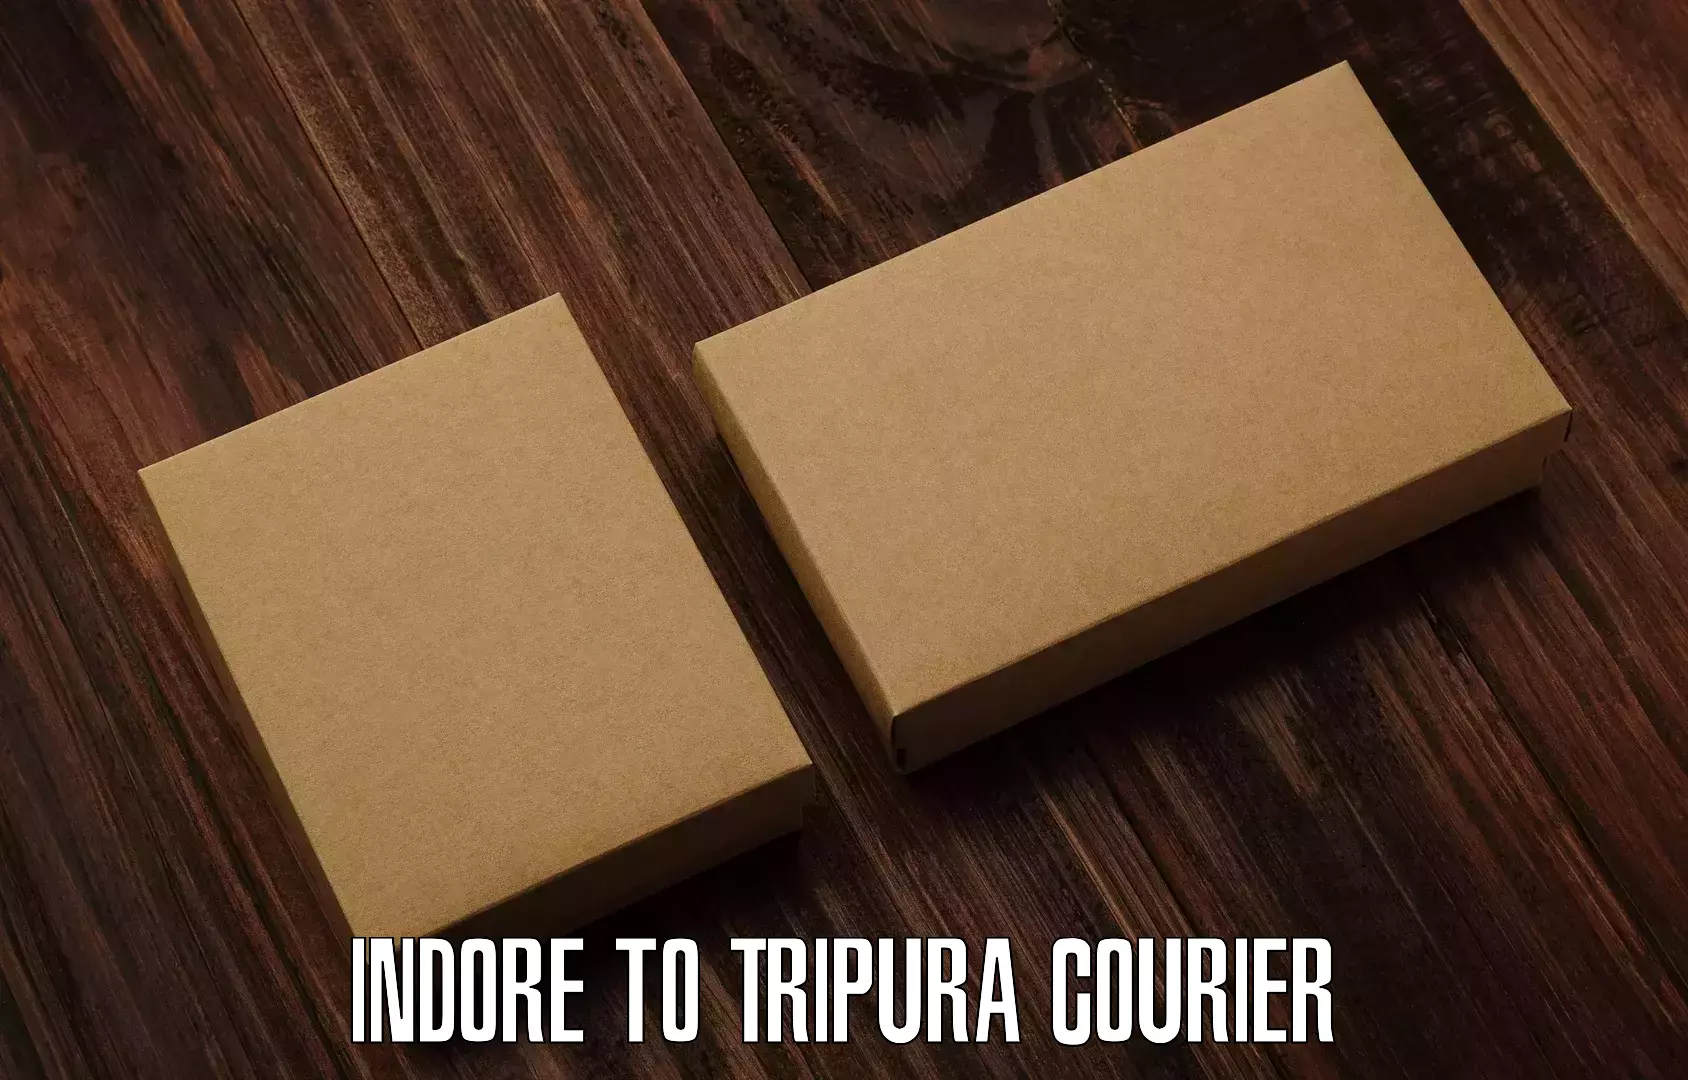 Individual parcel service Indore to Tripura